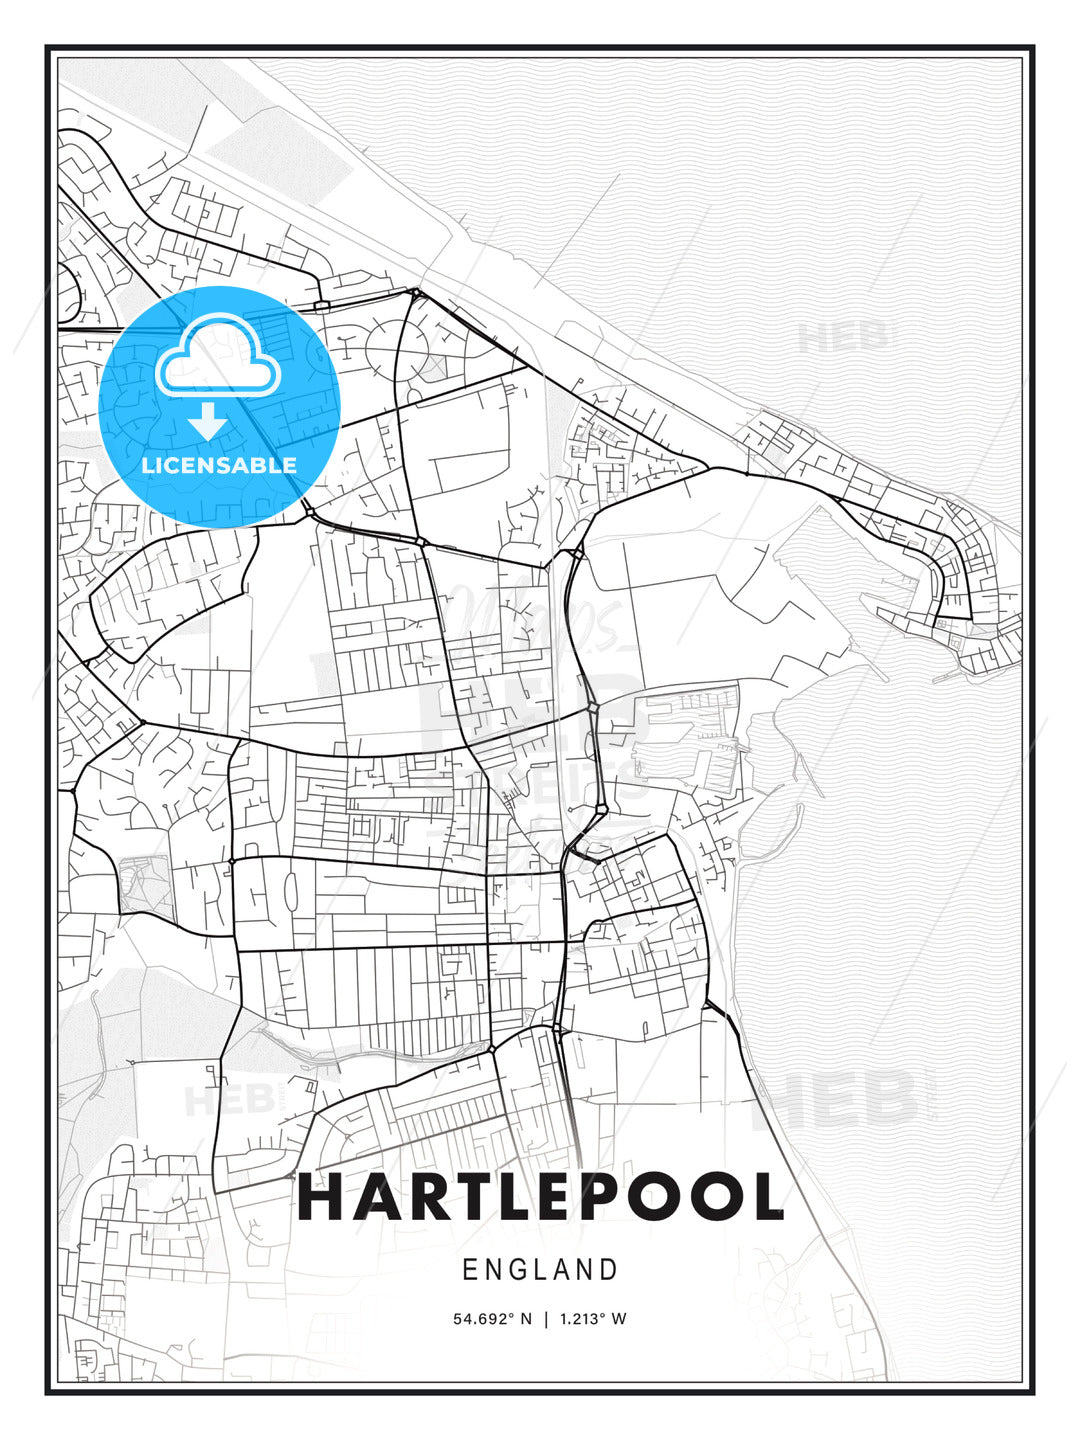 Hartlepool, England, Modern Print Template in Various Formats - HEBSTREITS Sketches